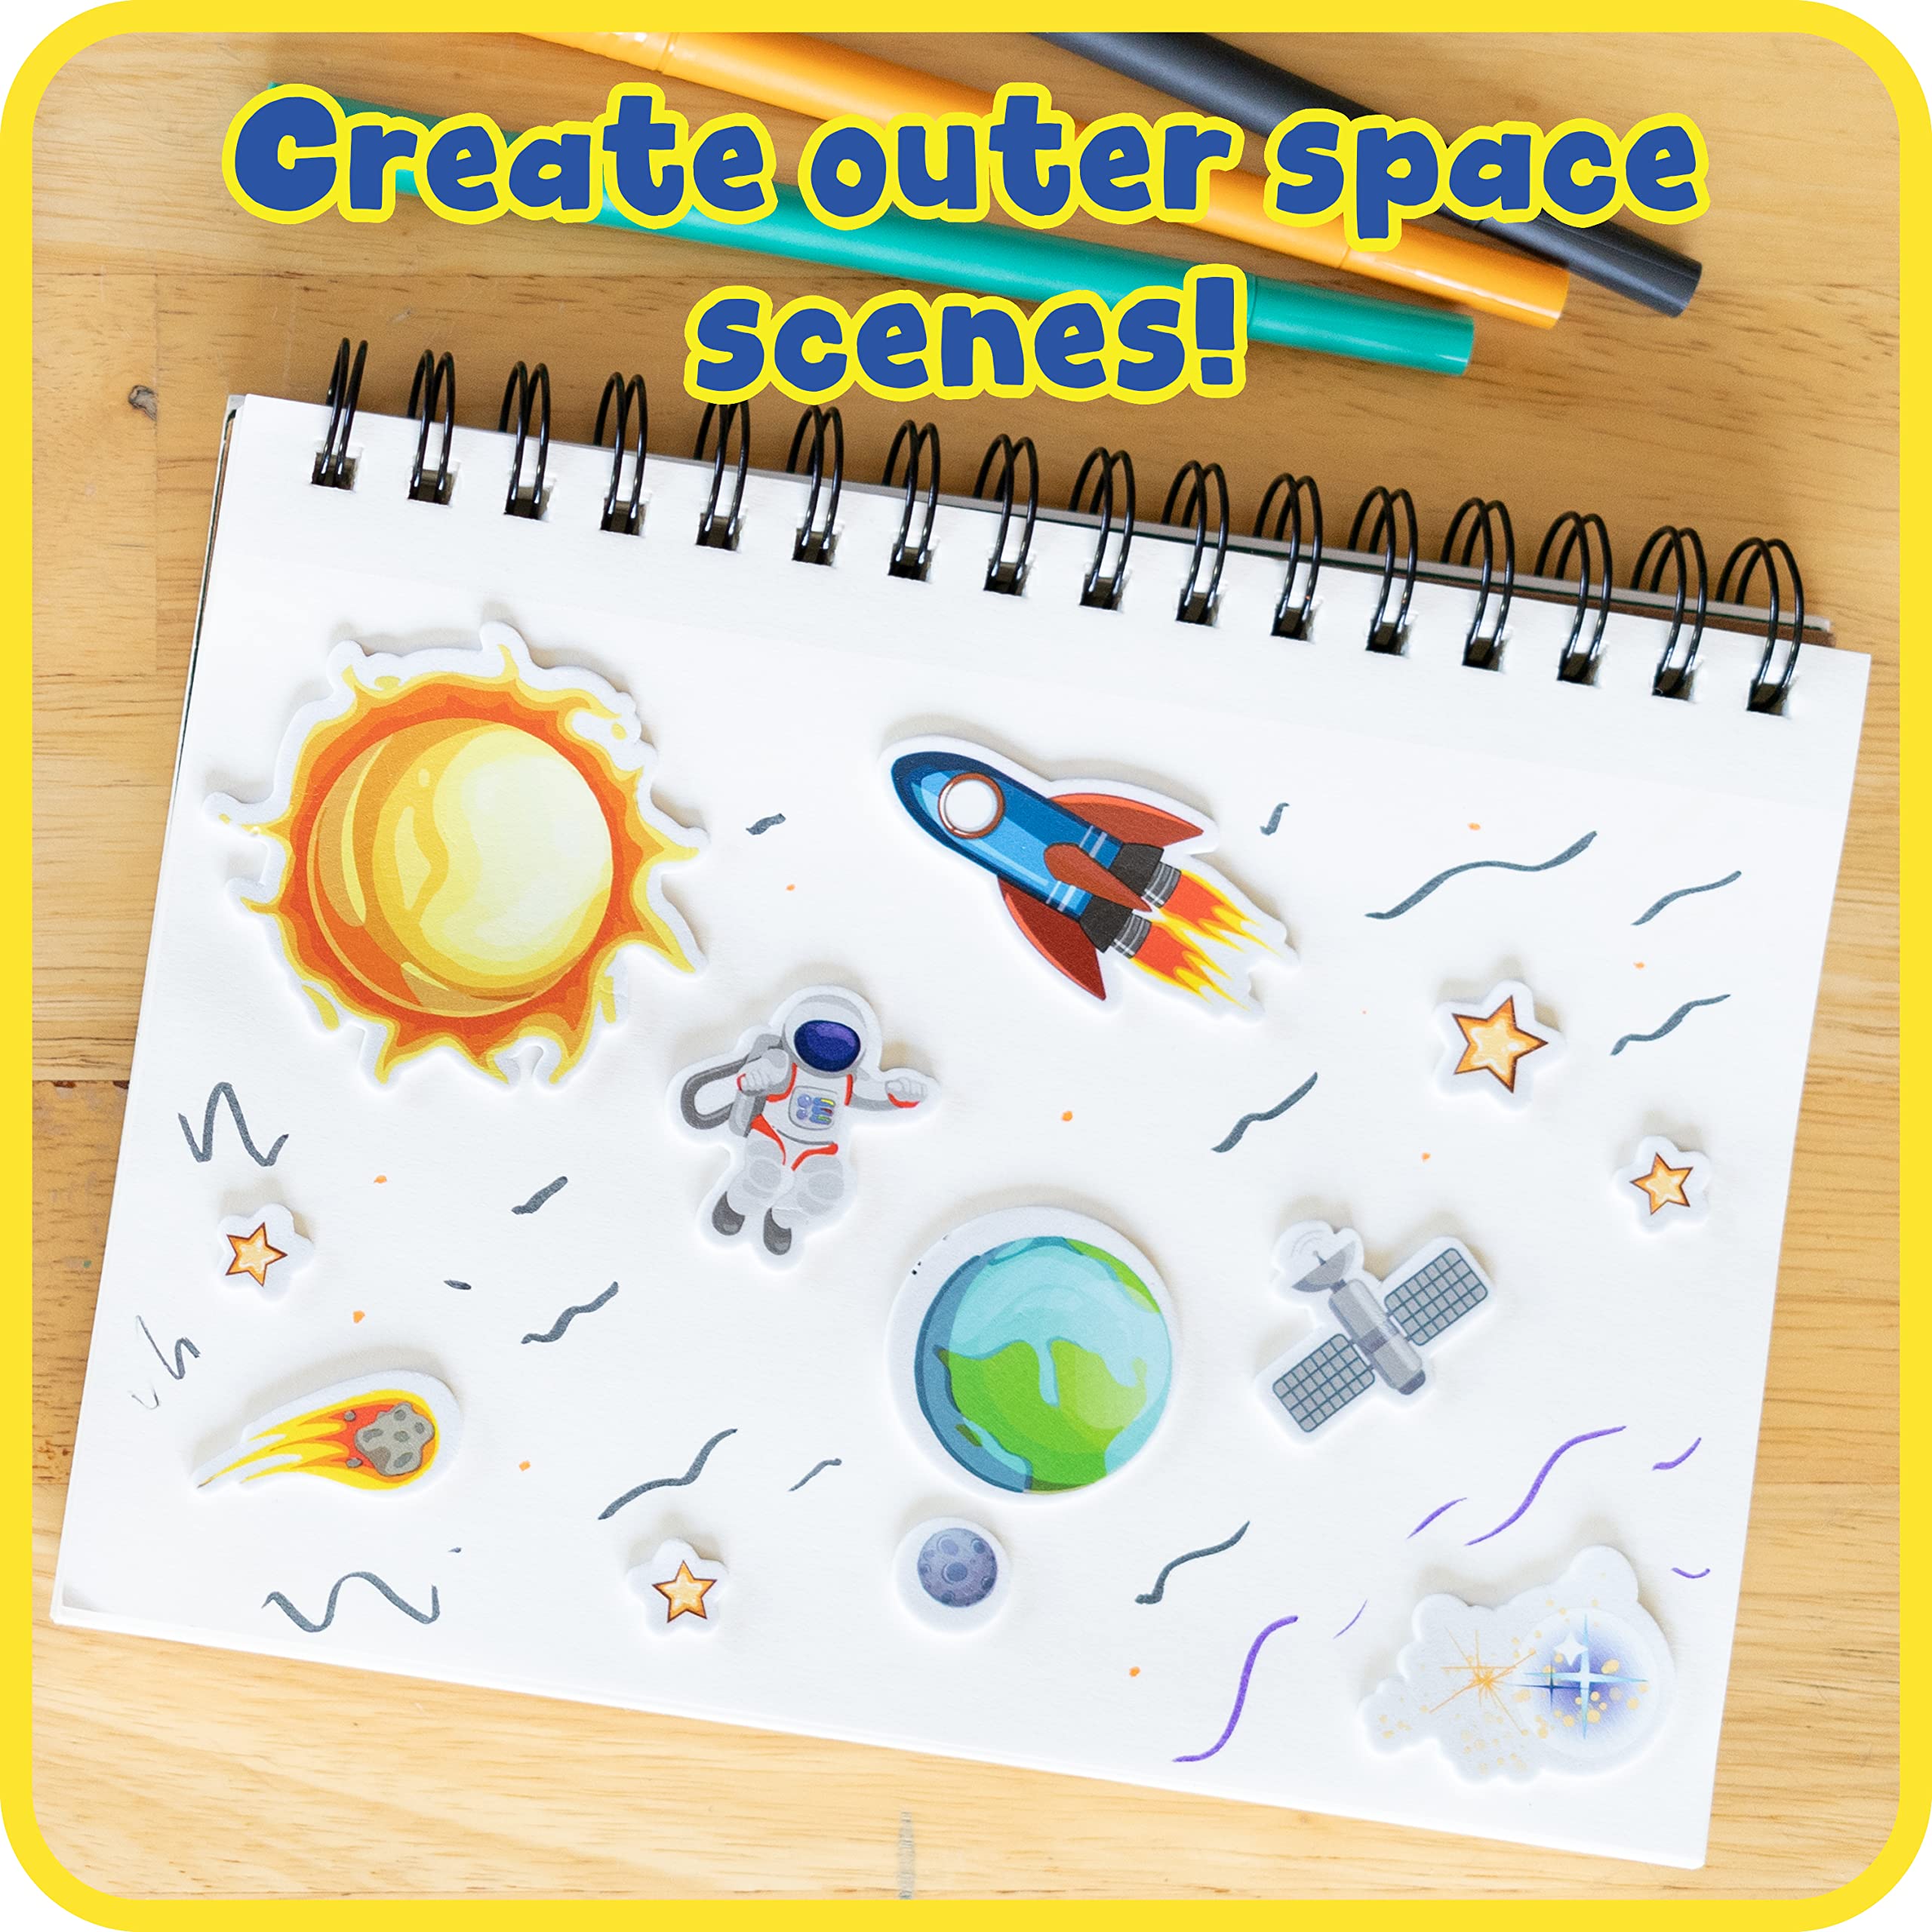 READY 2 LEARN Foam Stickers - Space - Pack of 152 - Self-Adhesive Stickers for Kids - 3D Puffy Planet Stickers for Laptops, Party Favors and Crafts